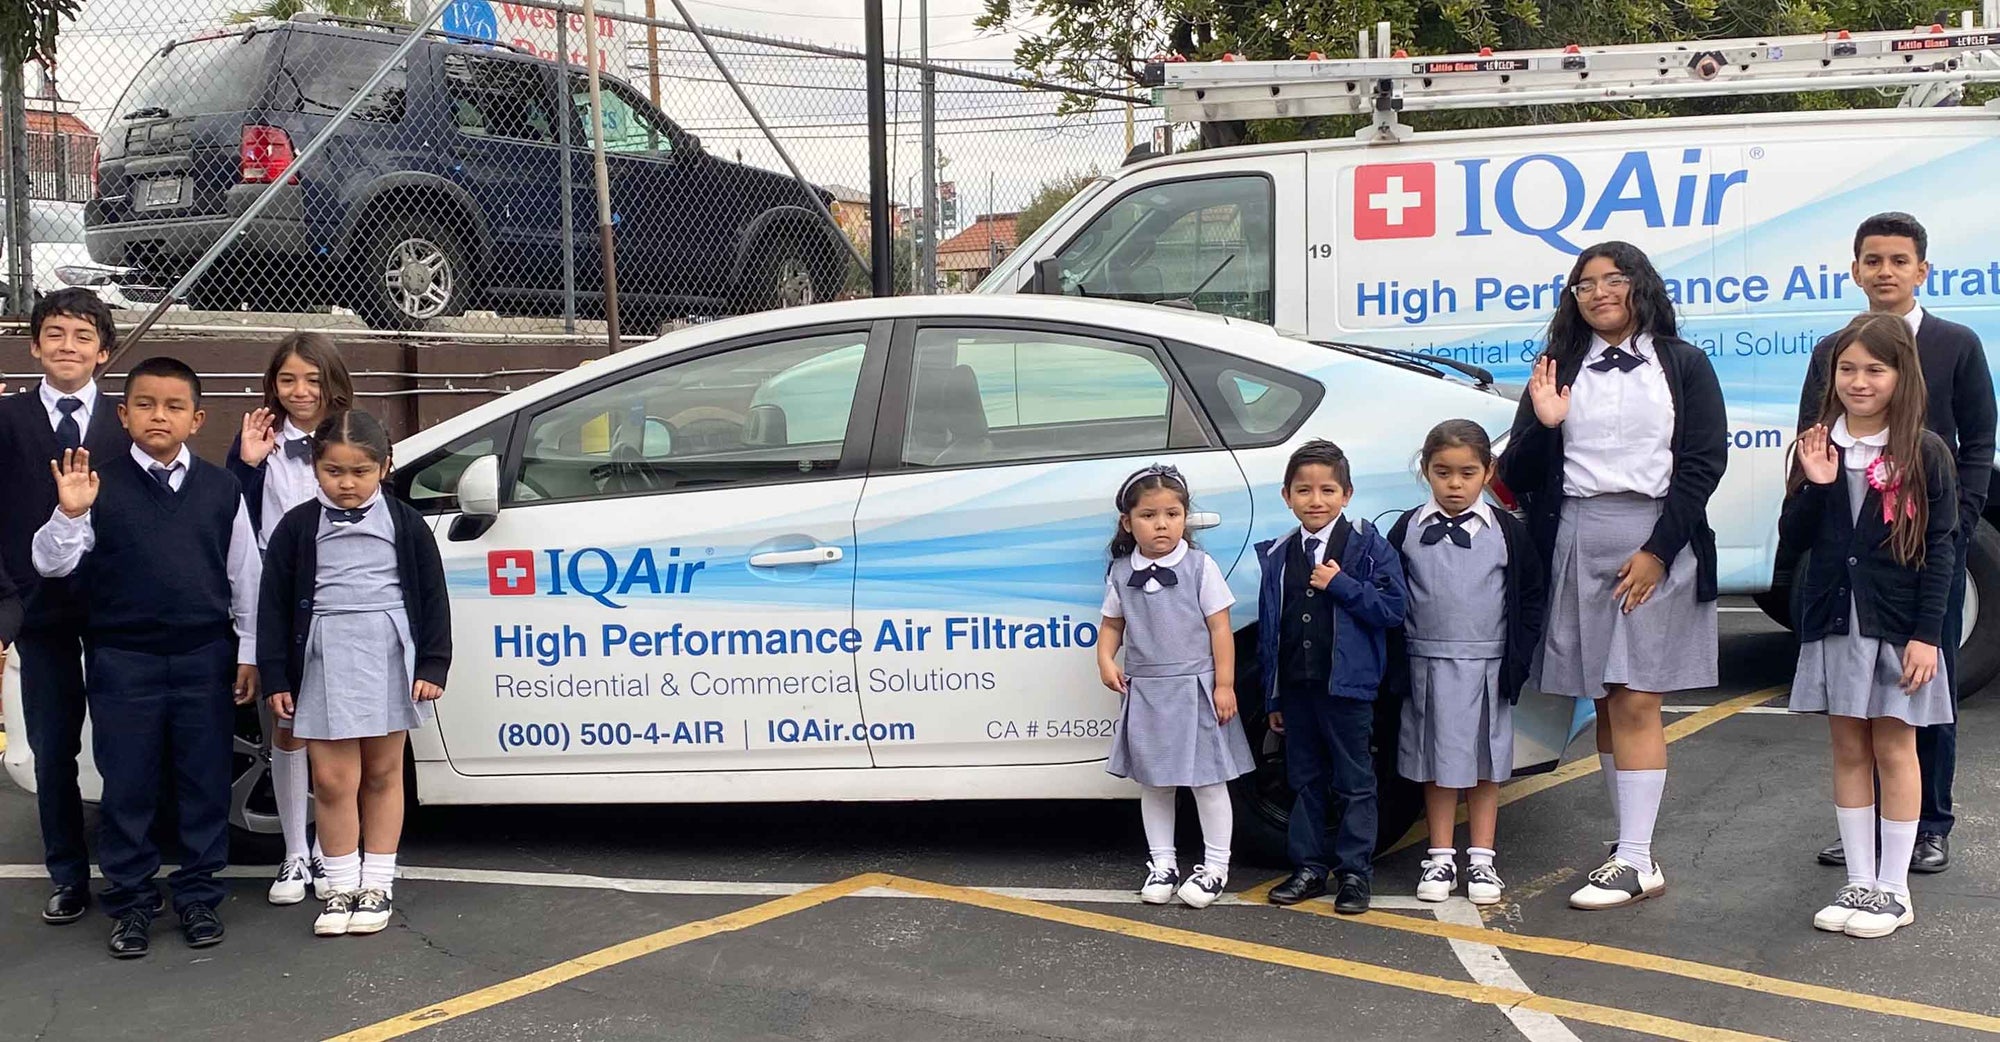 IQAir and South Coast AQMD partner for clean air in classrooms